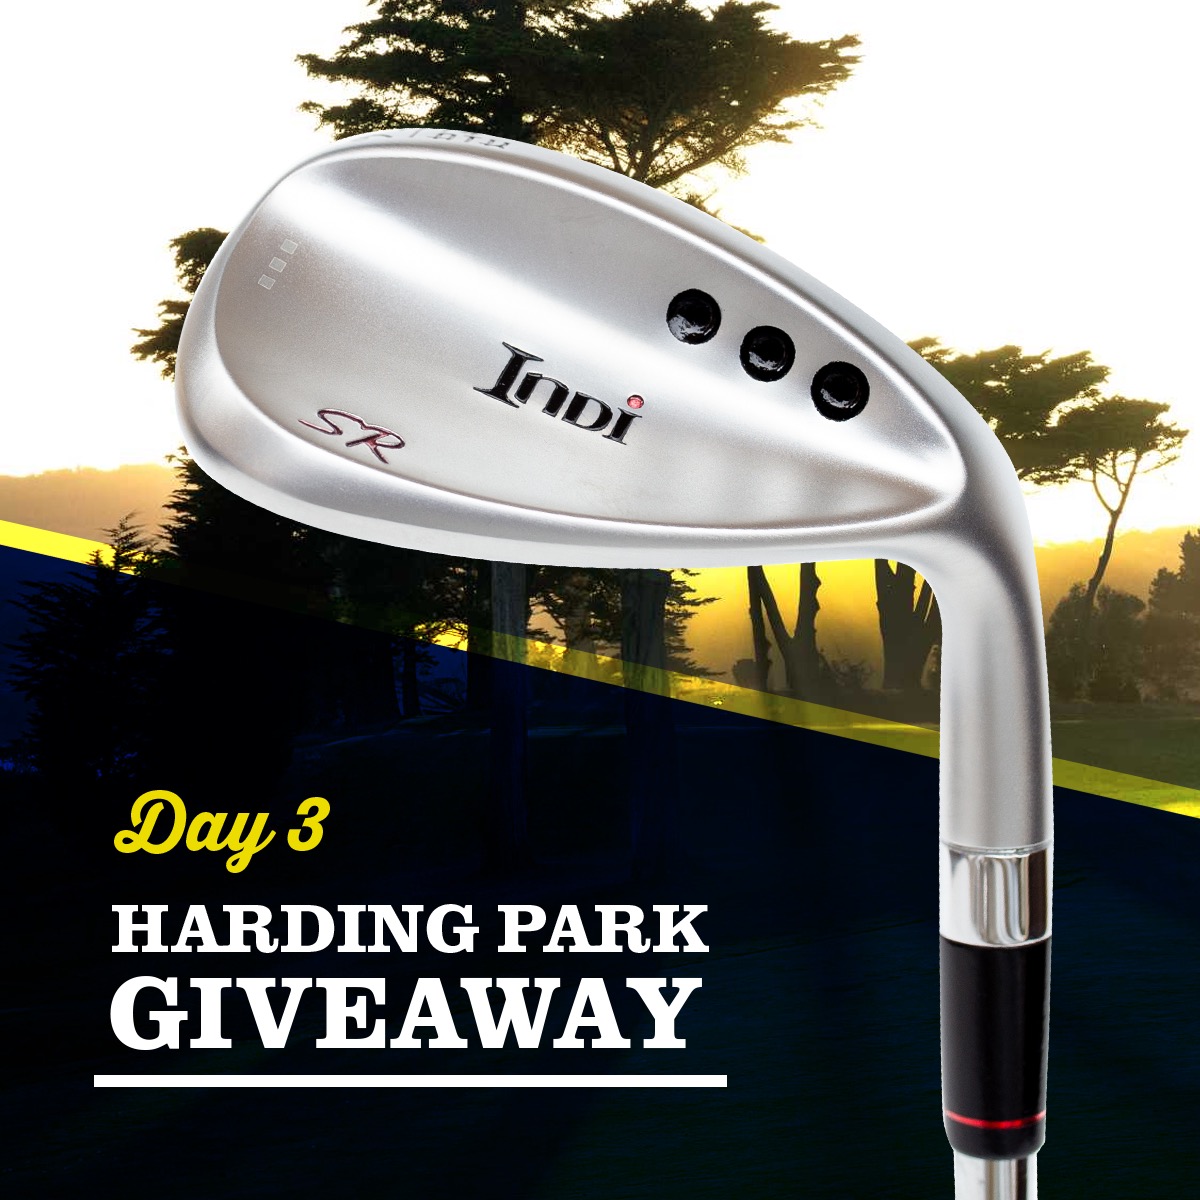 Let’s do this | 3rd prize is your wedge of choice! Head over to bit.ly/3i0E6ZZ for multiple entry options | Good luck! #golf #golfgiveaway #golfcontest #pgatour #pgachampionship #golfwedge #thepga